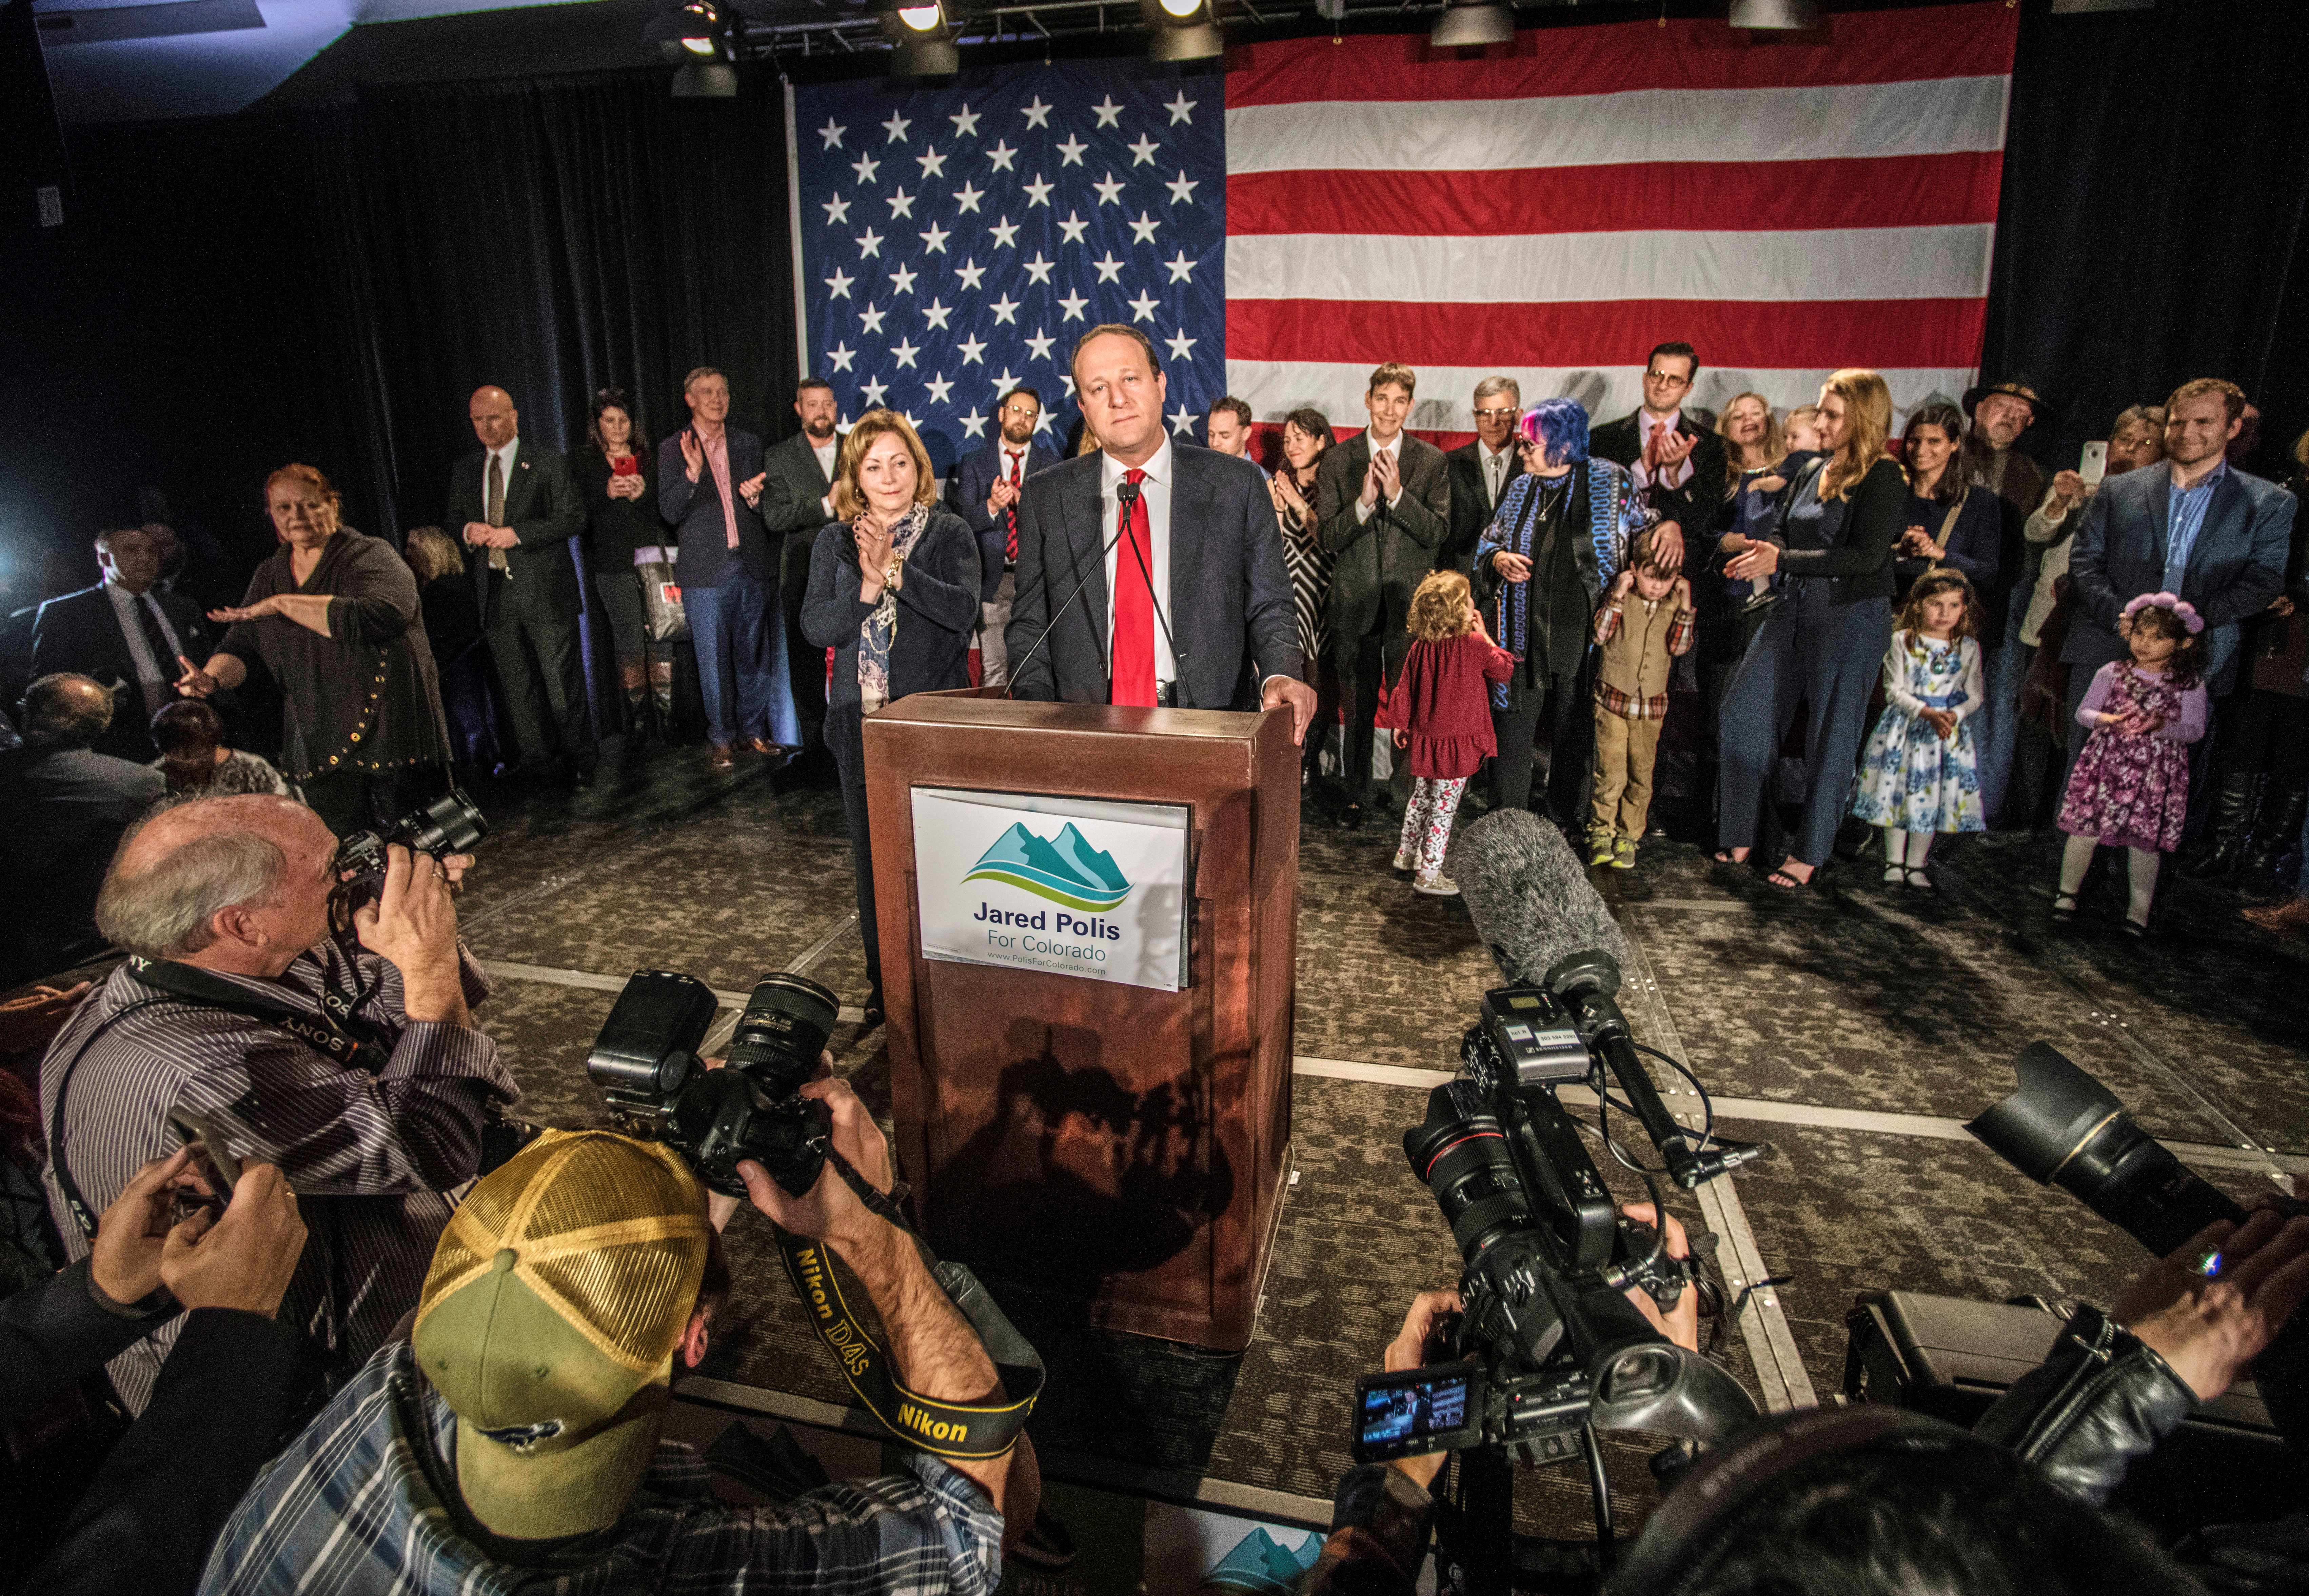 Democratic gubernatorial candidate Jared Polis speaks at his midterm election night party in Denver